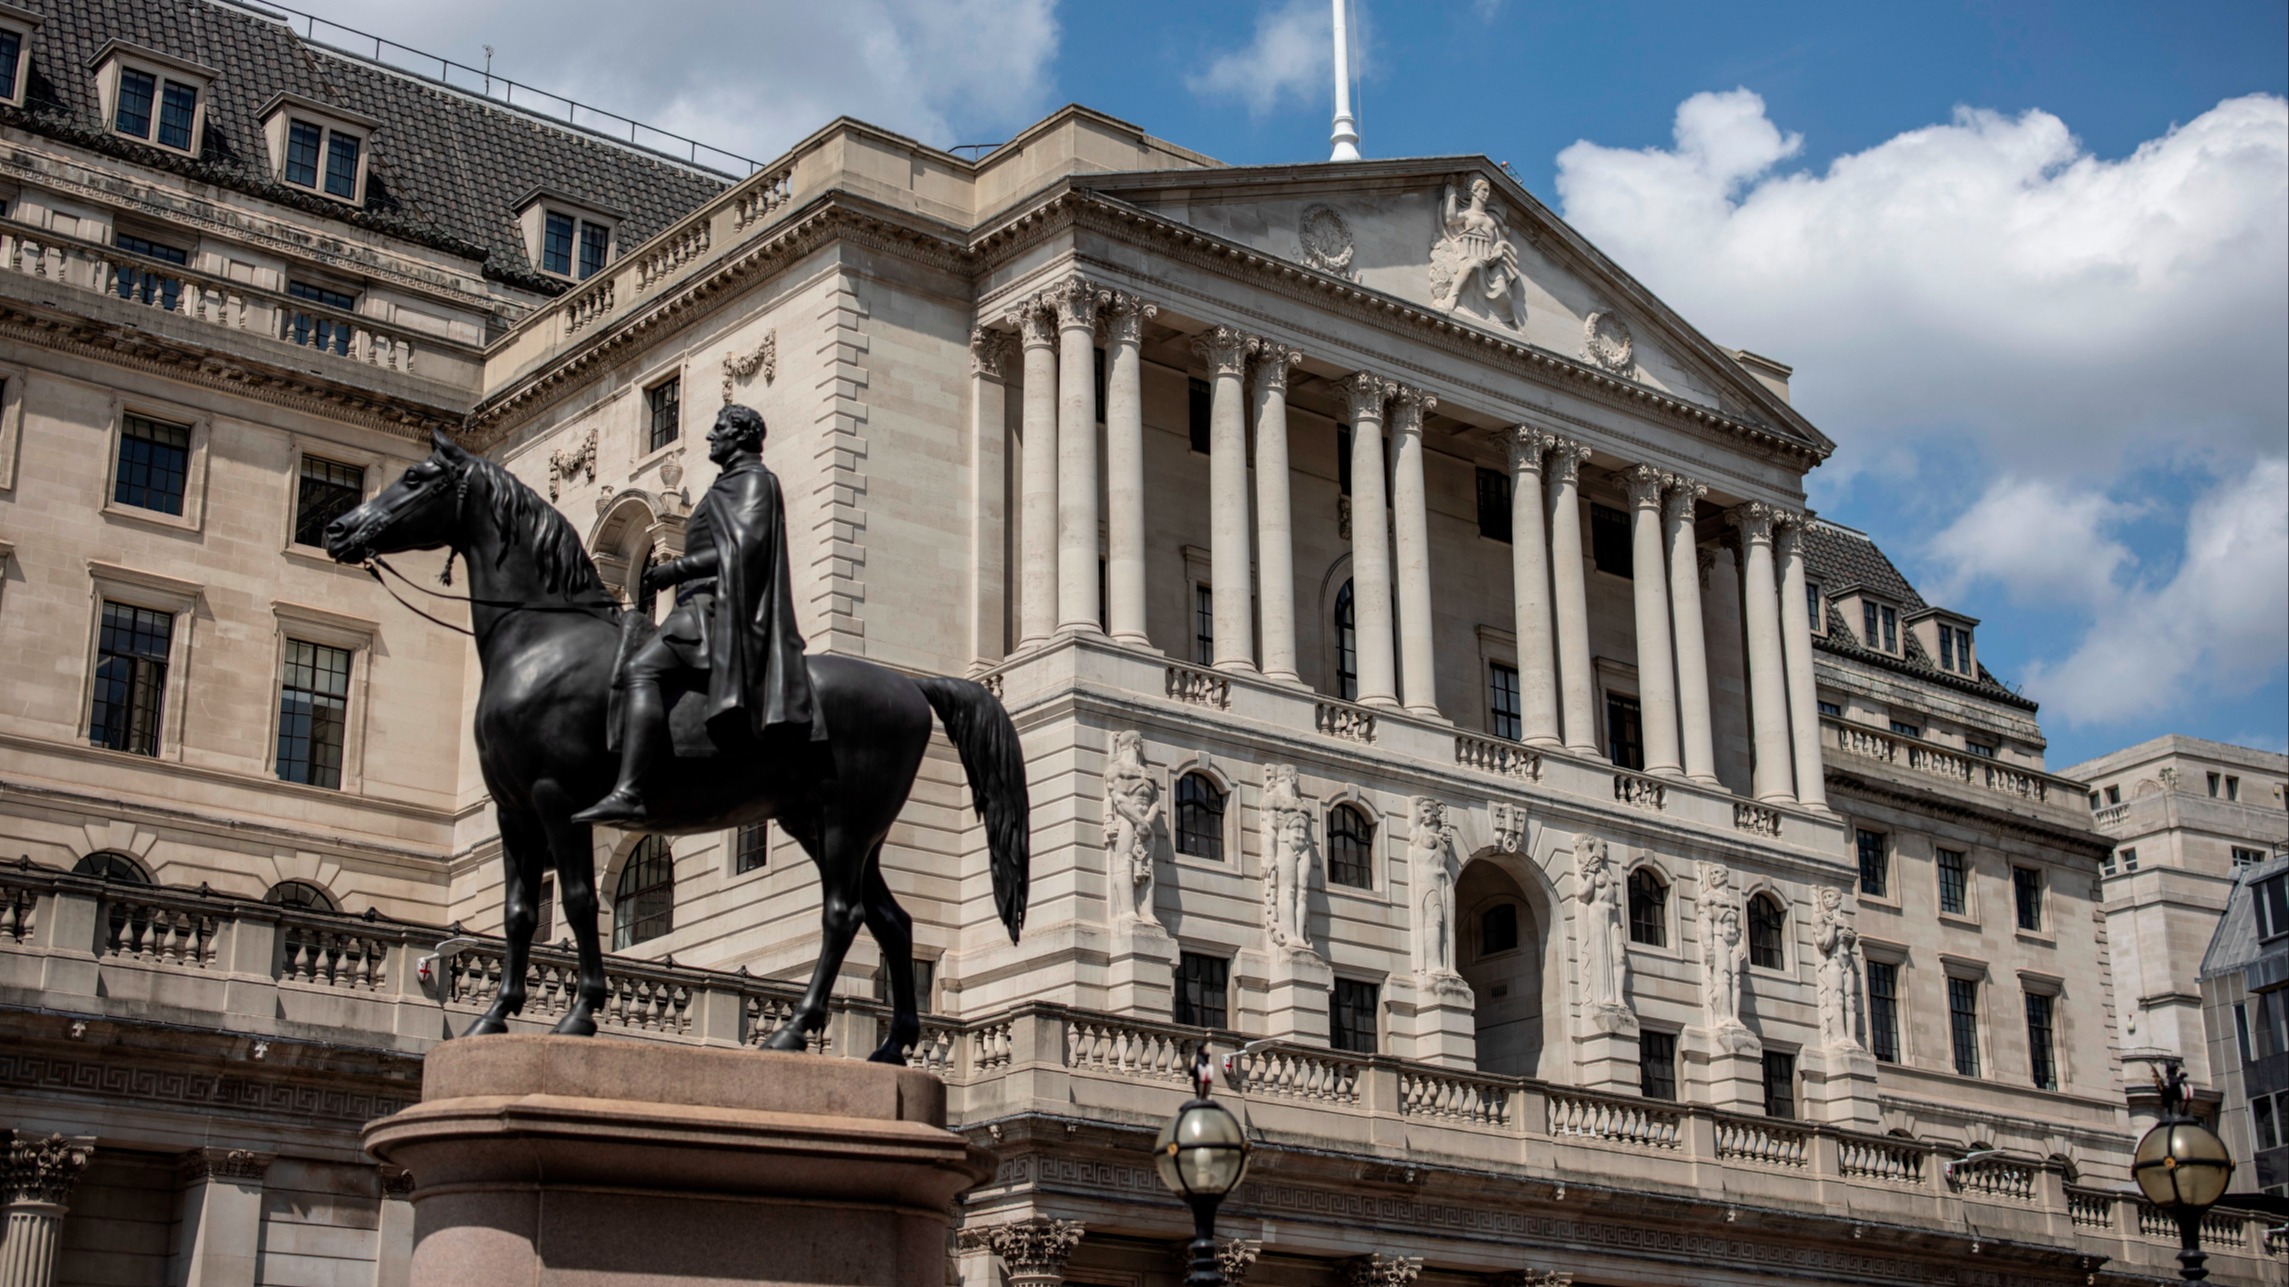 Bank of England raises interest rates by 0.5 percentage points | Financial Times